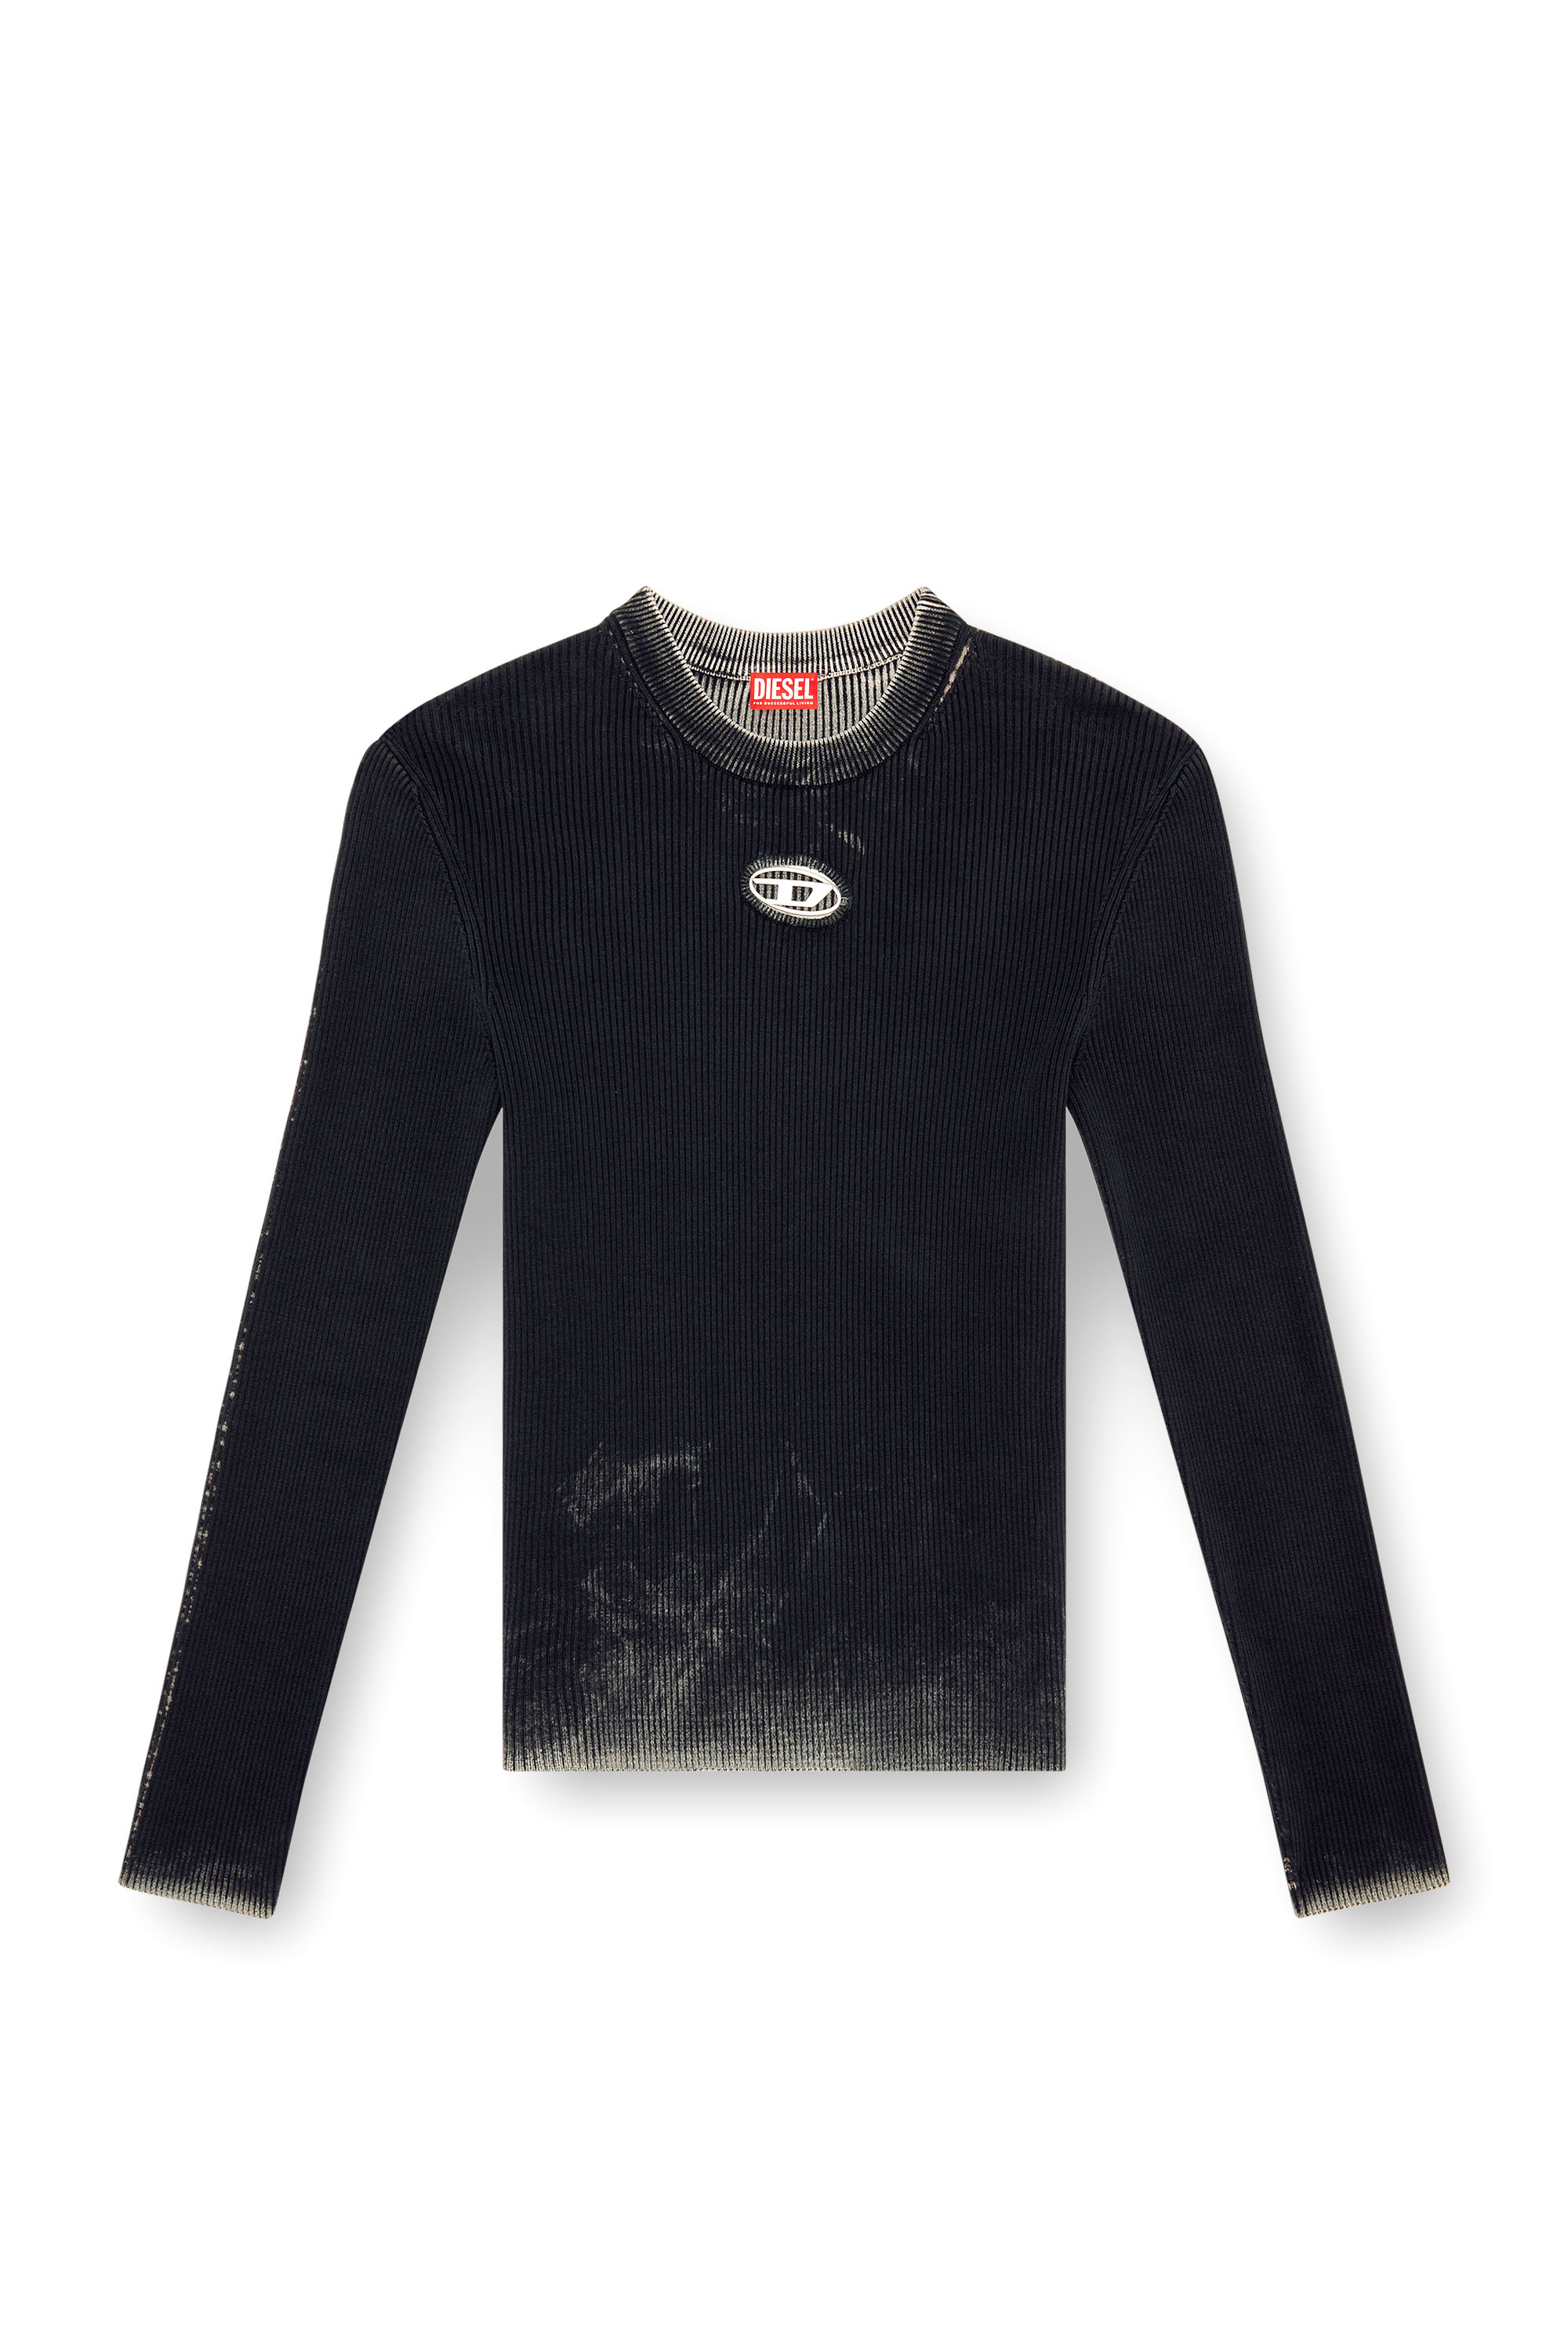 Diesel - K-DARIN-A, Man Cut-out jumper with Oval D in Black - Image 3